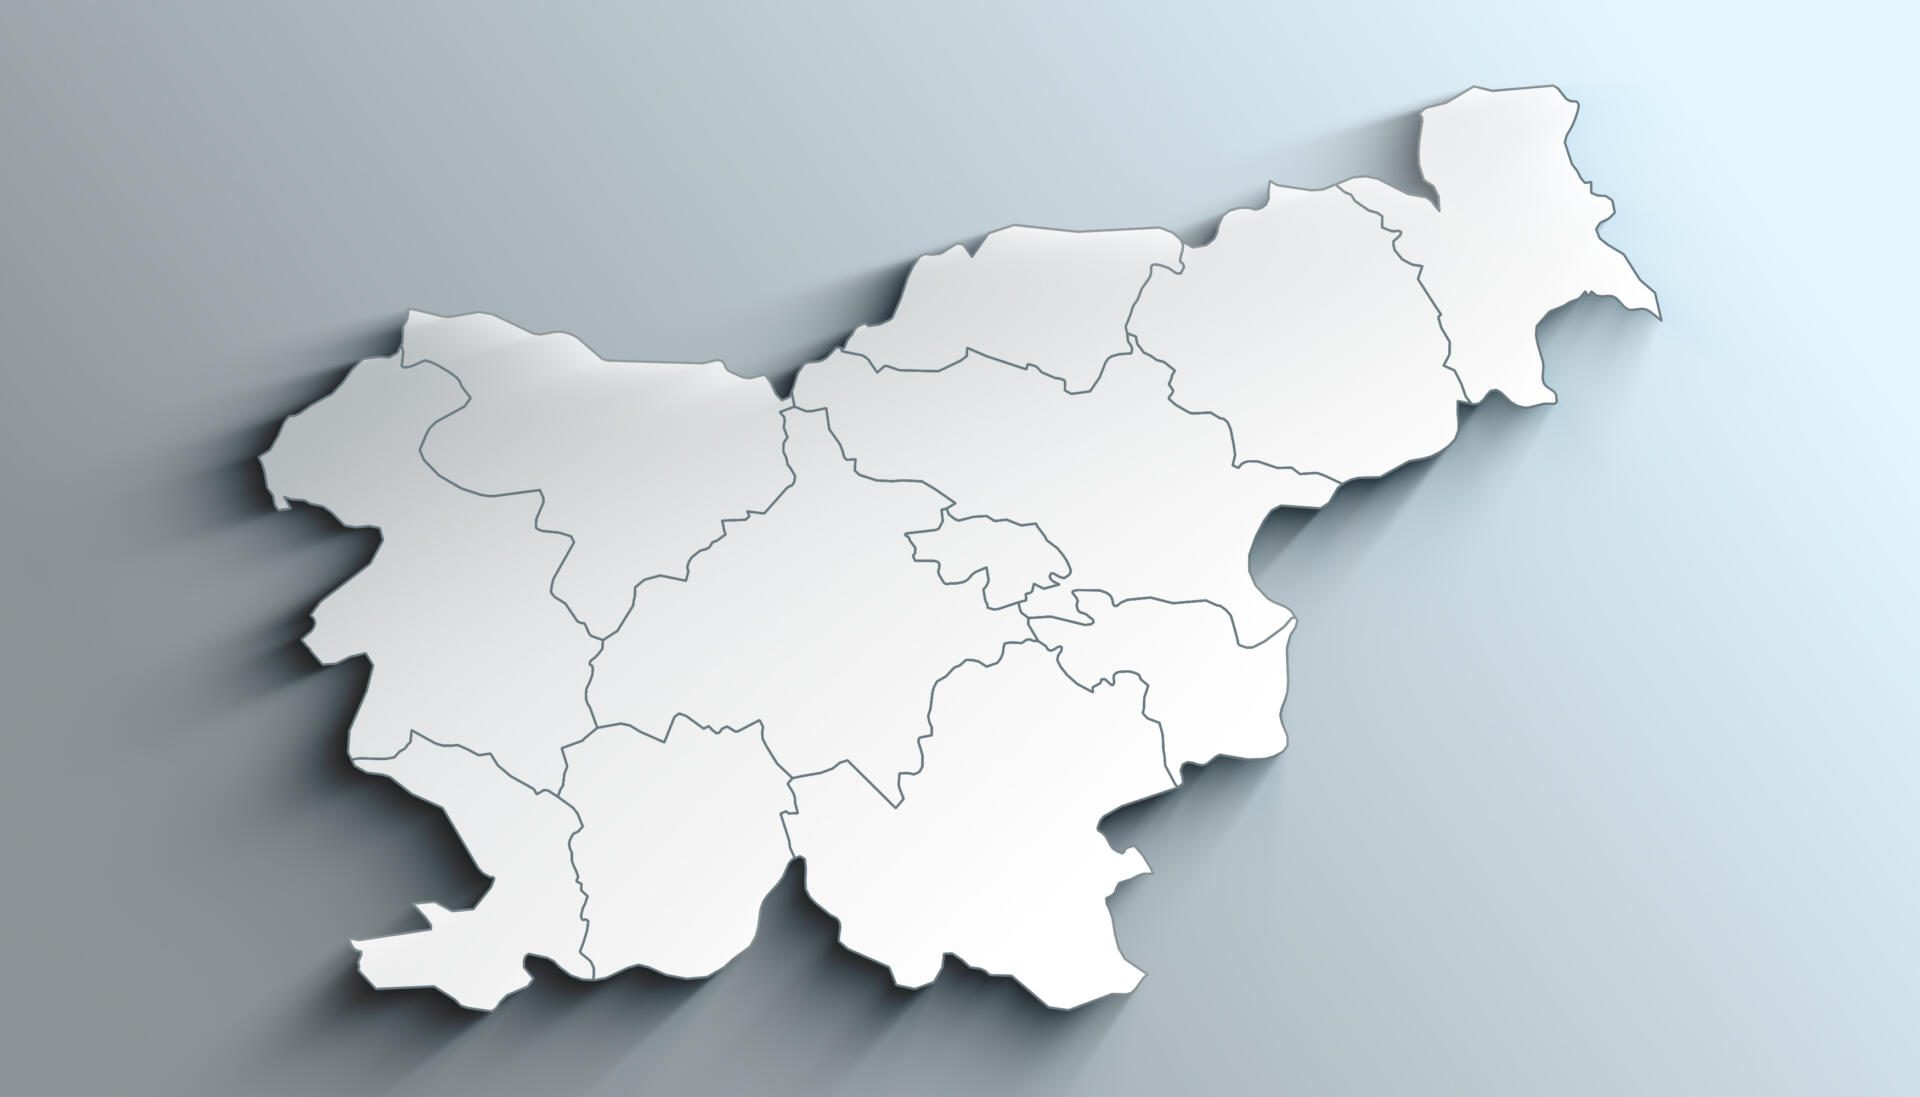 Geographical Map of Slovenia with Statistical regions with Regions with Shadows